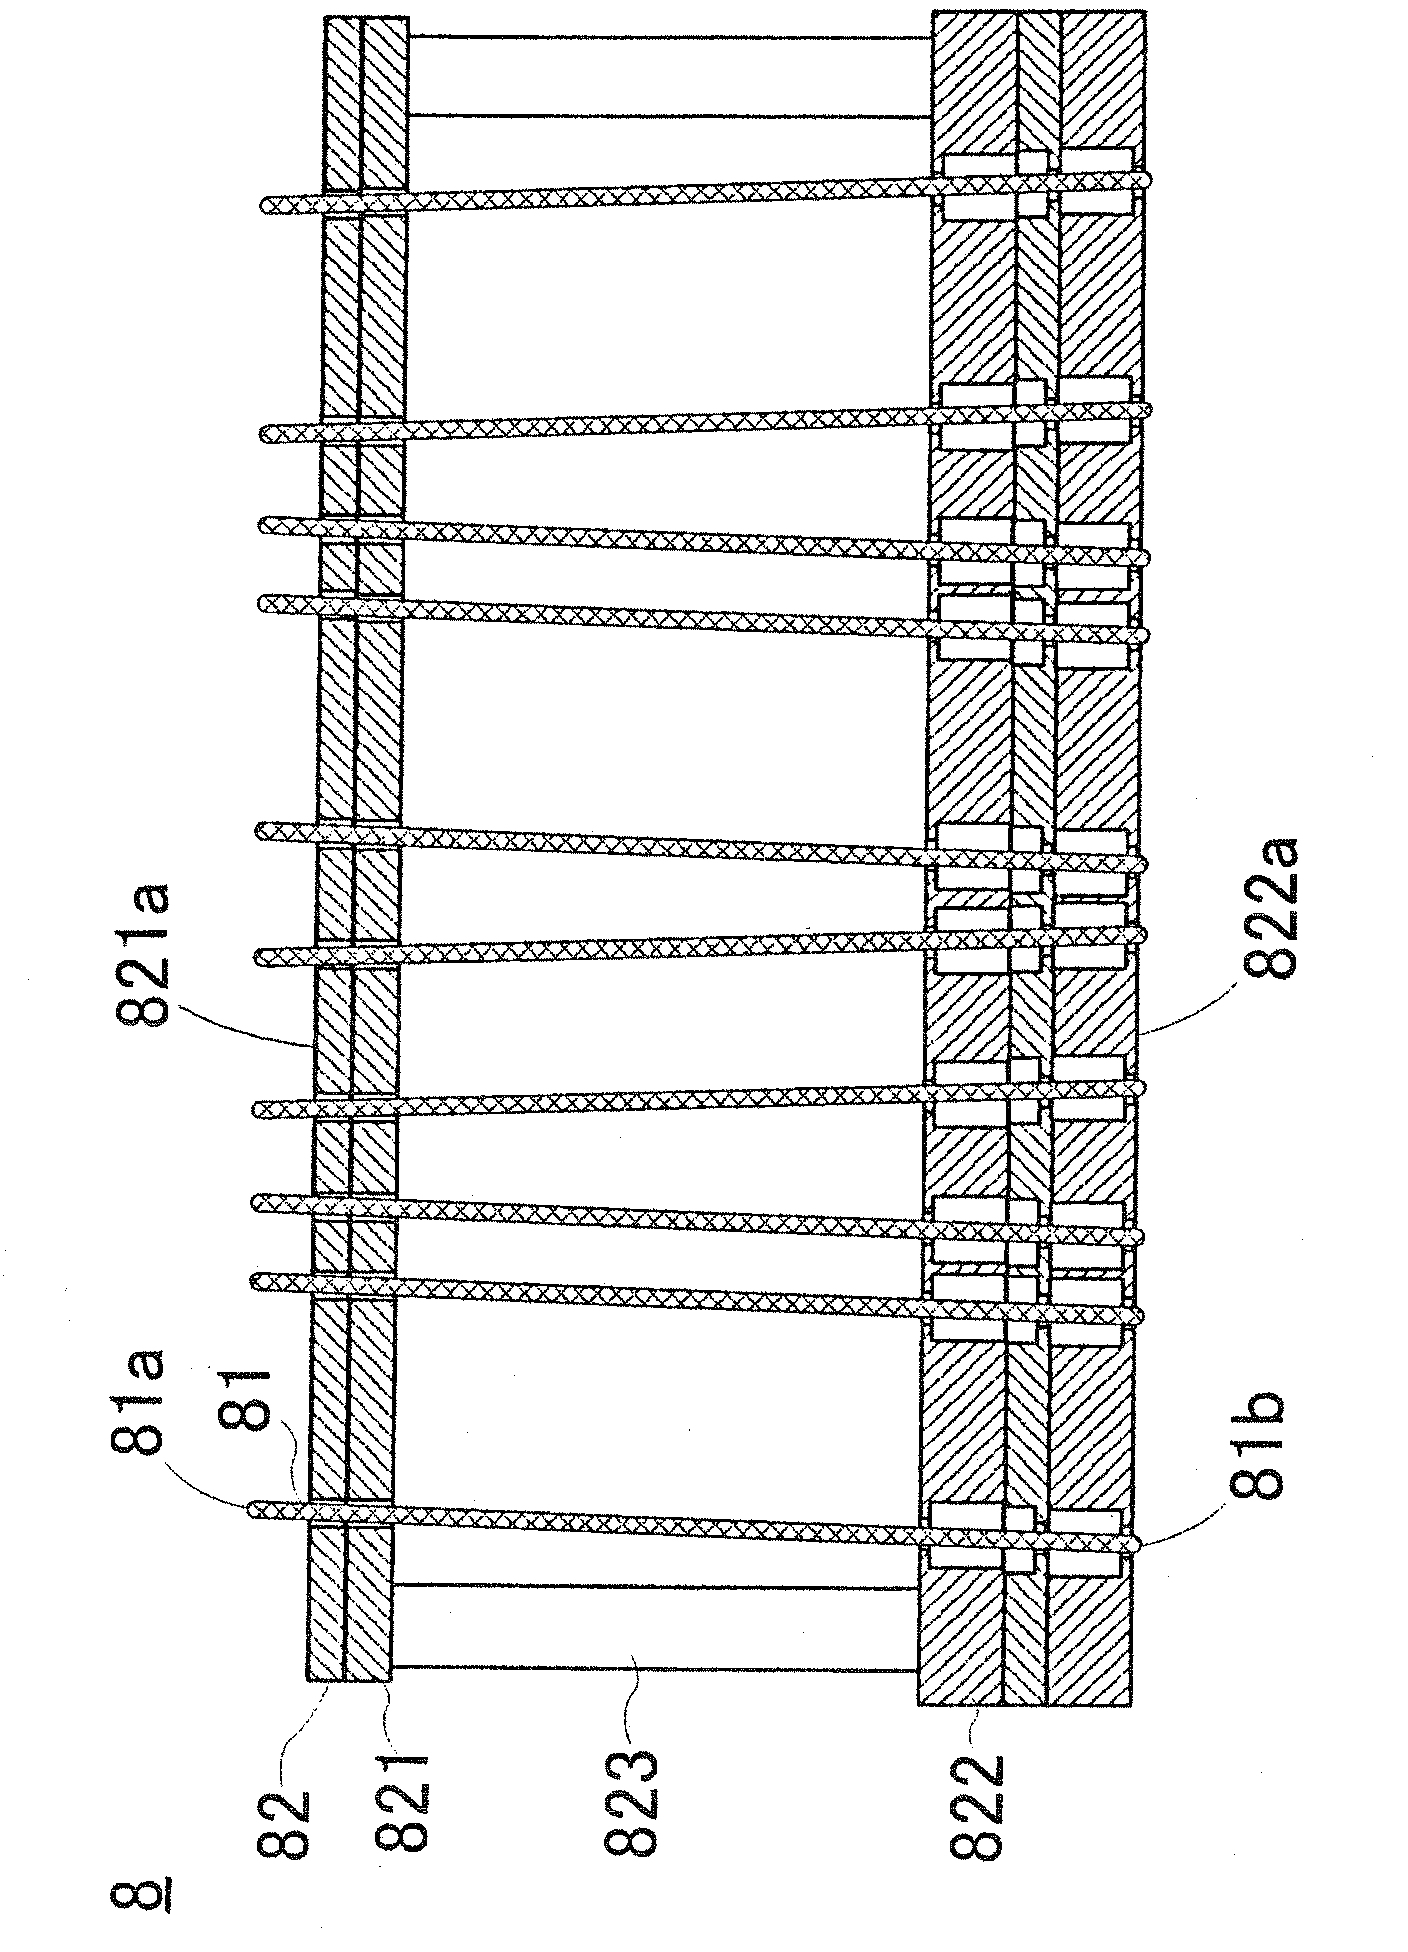 Jig for substrate inspection, base units of jig and substrate inspection apparatus